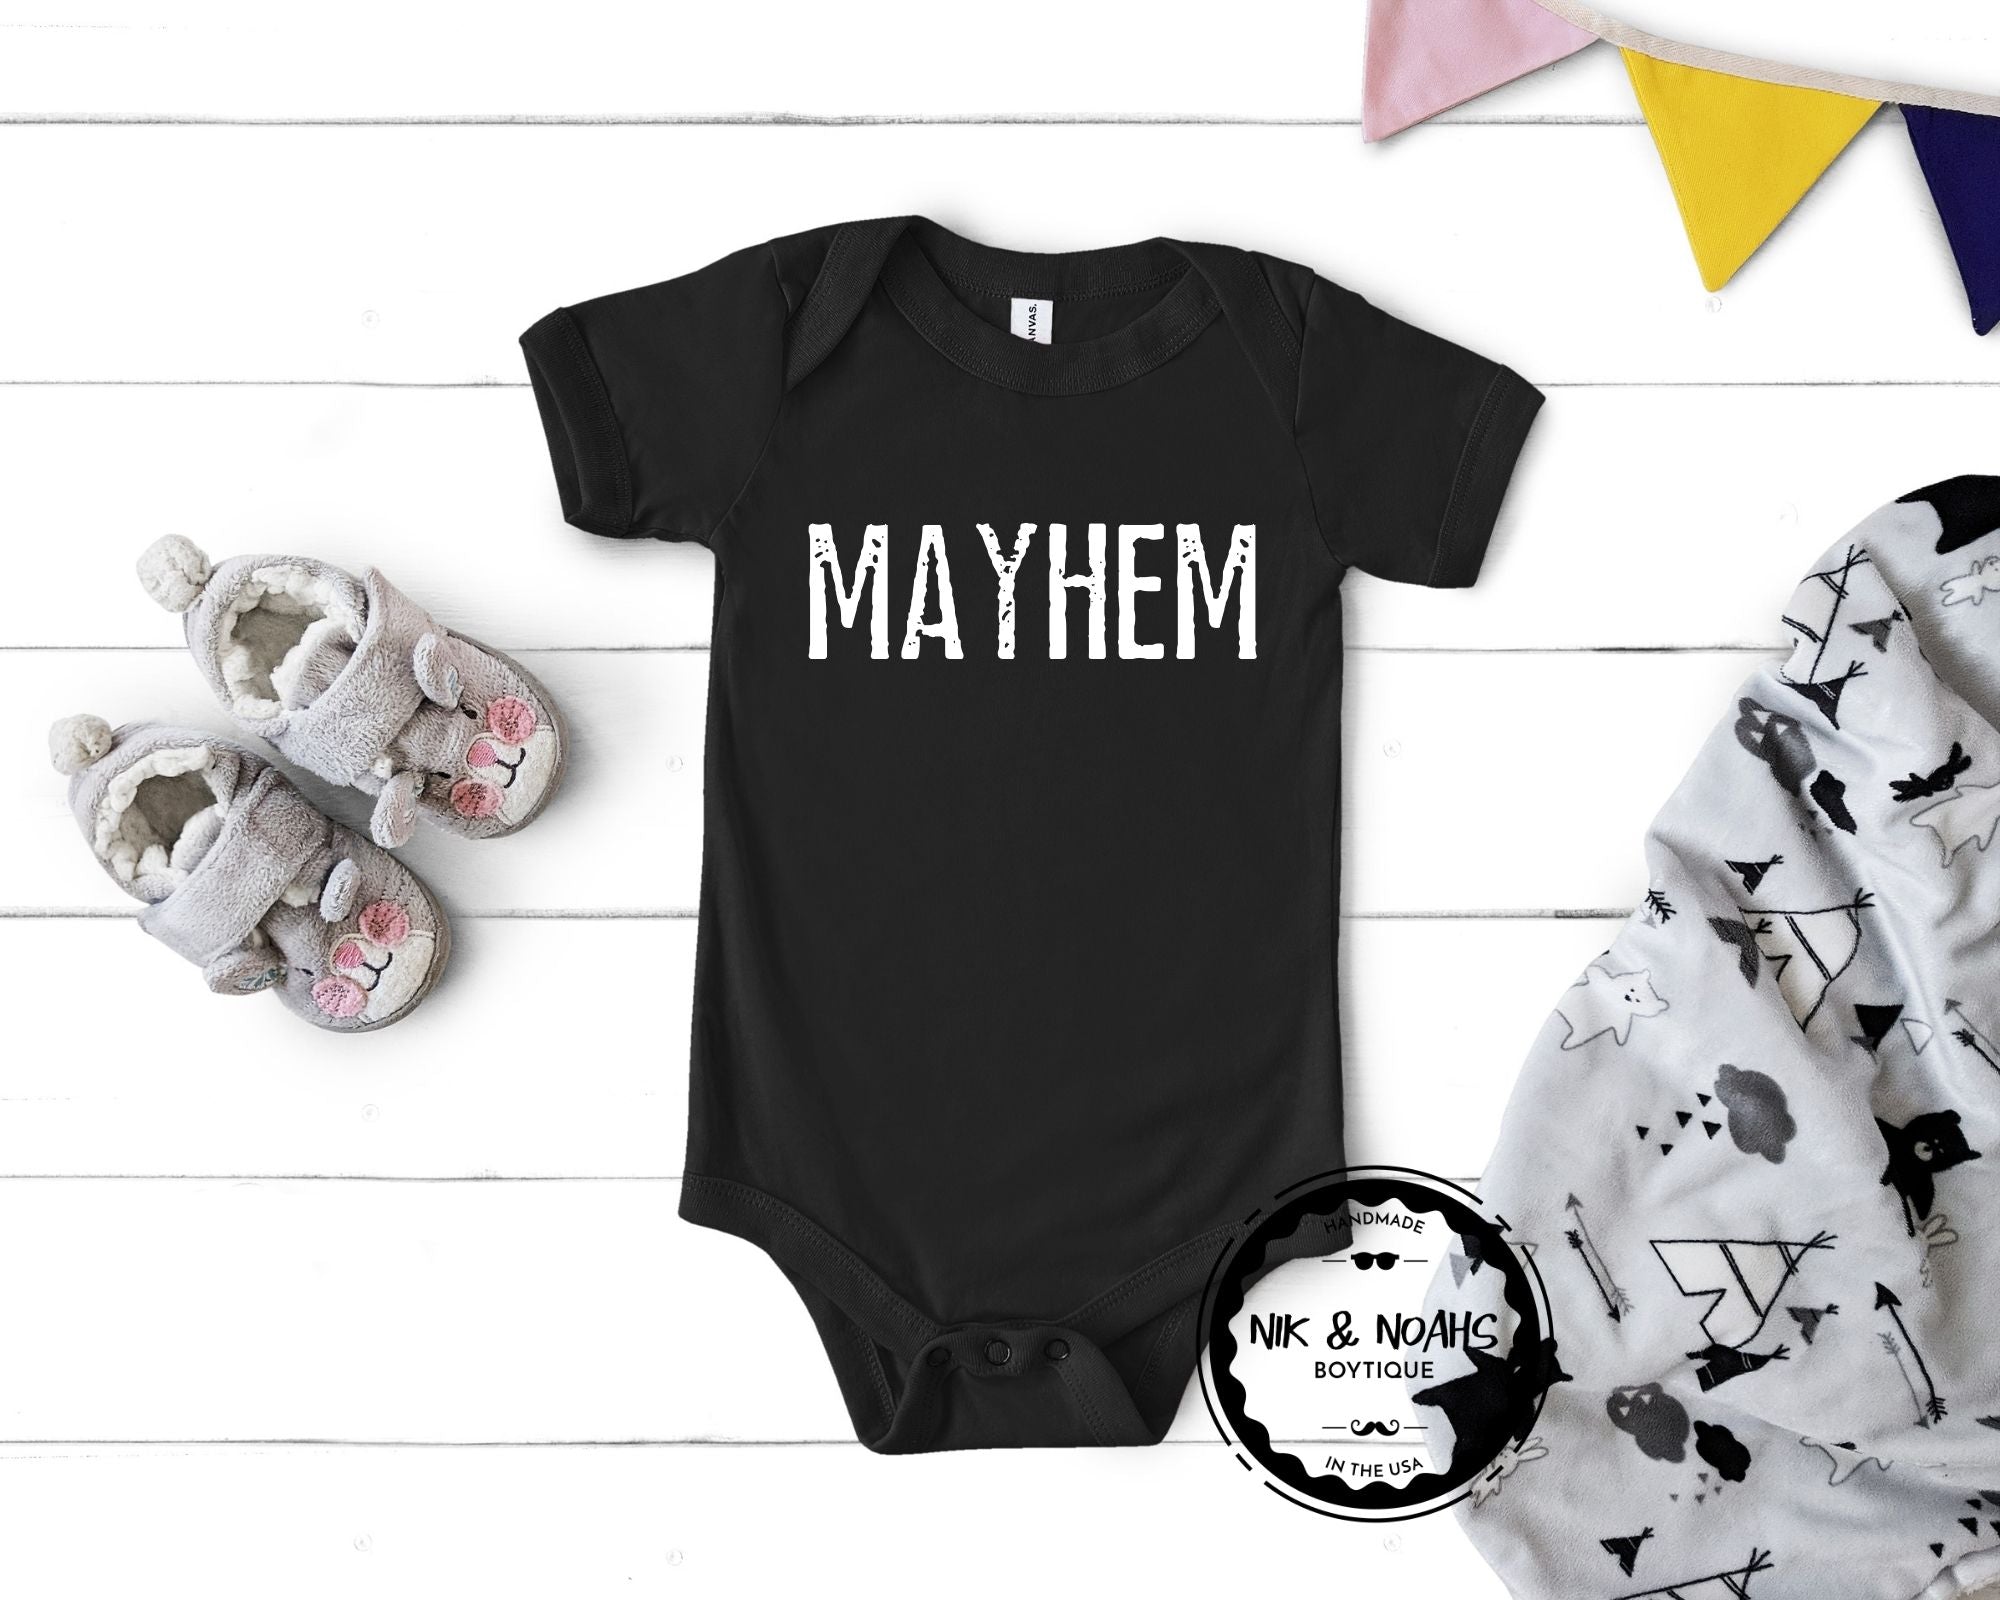 Download Matching Mom Baby Toddler Graphic Tees Mother Of Mayhem Unisex Noah S Boytique